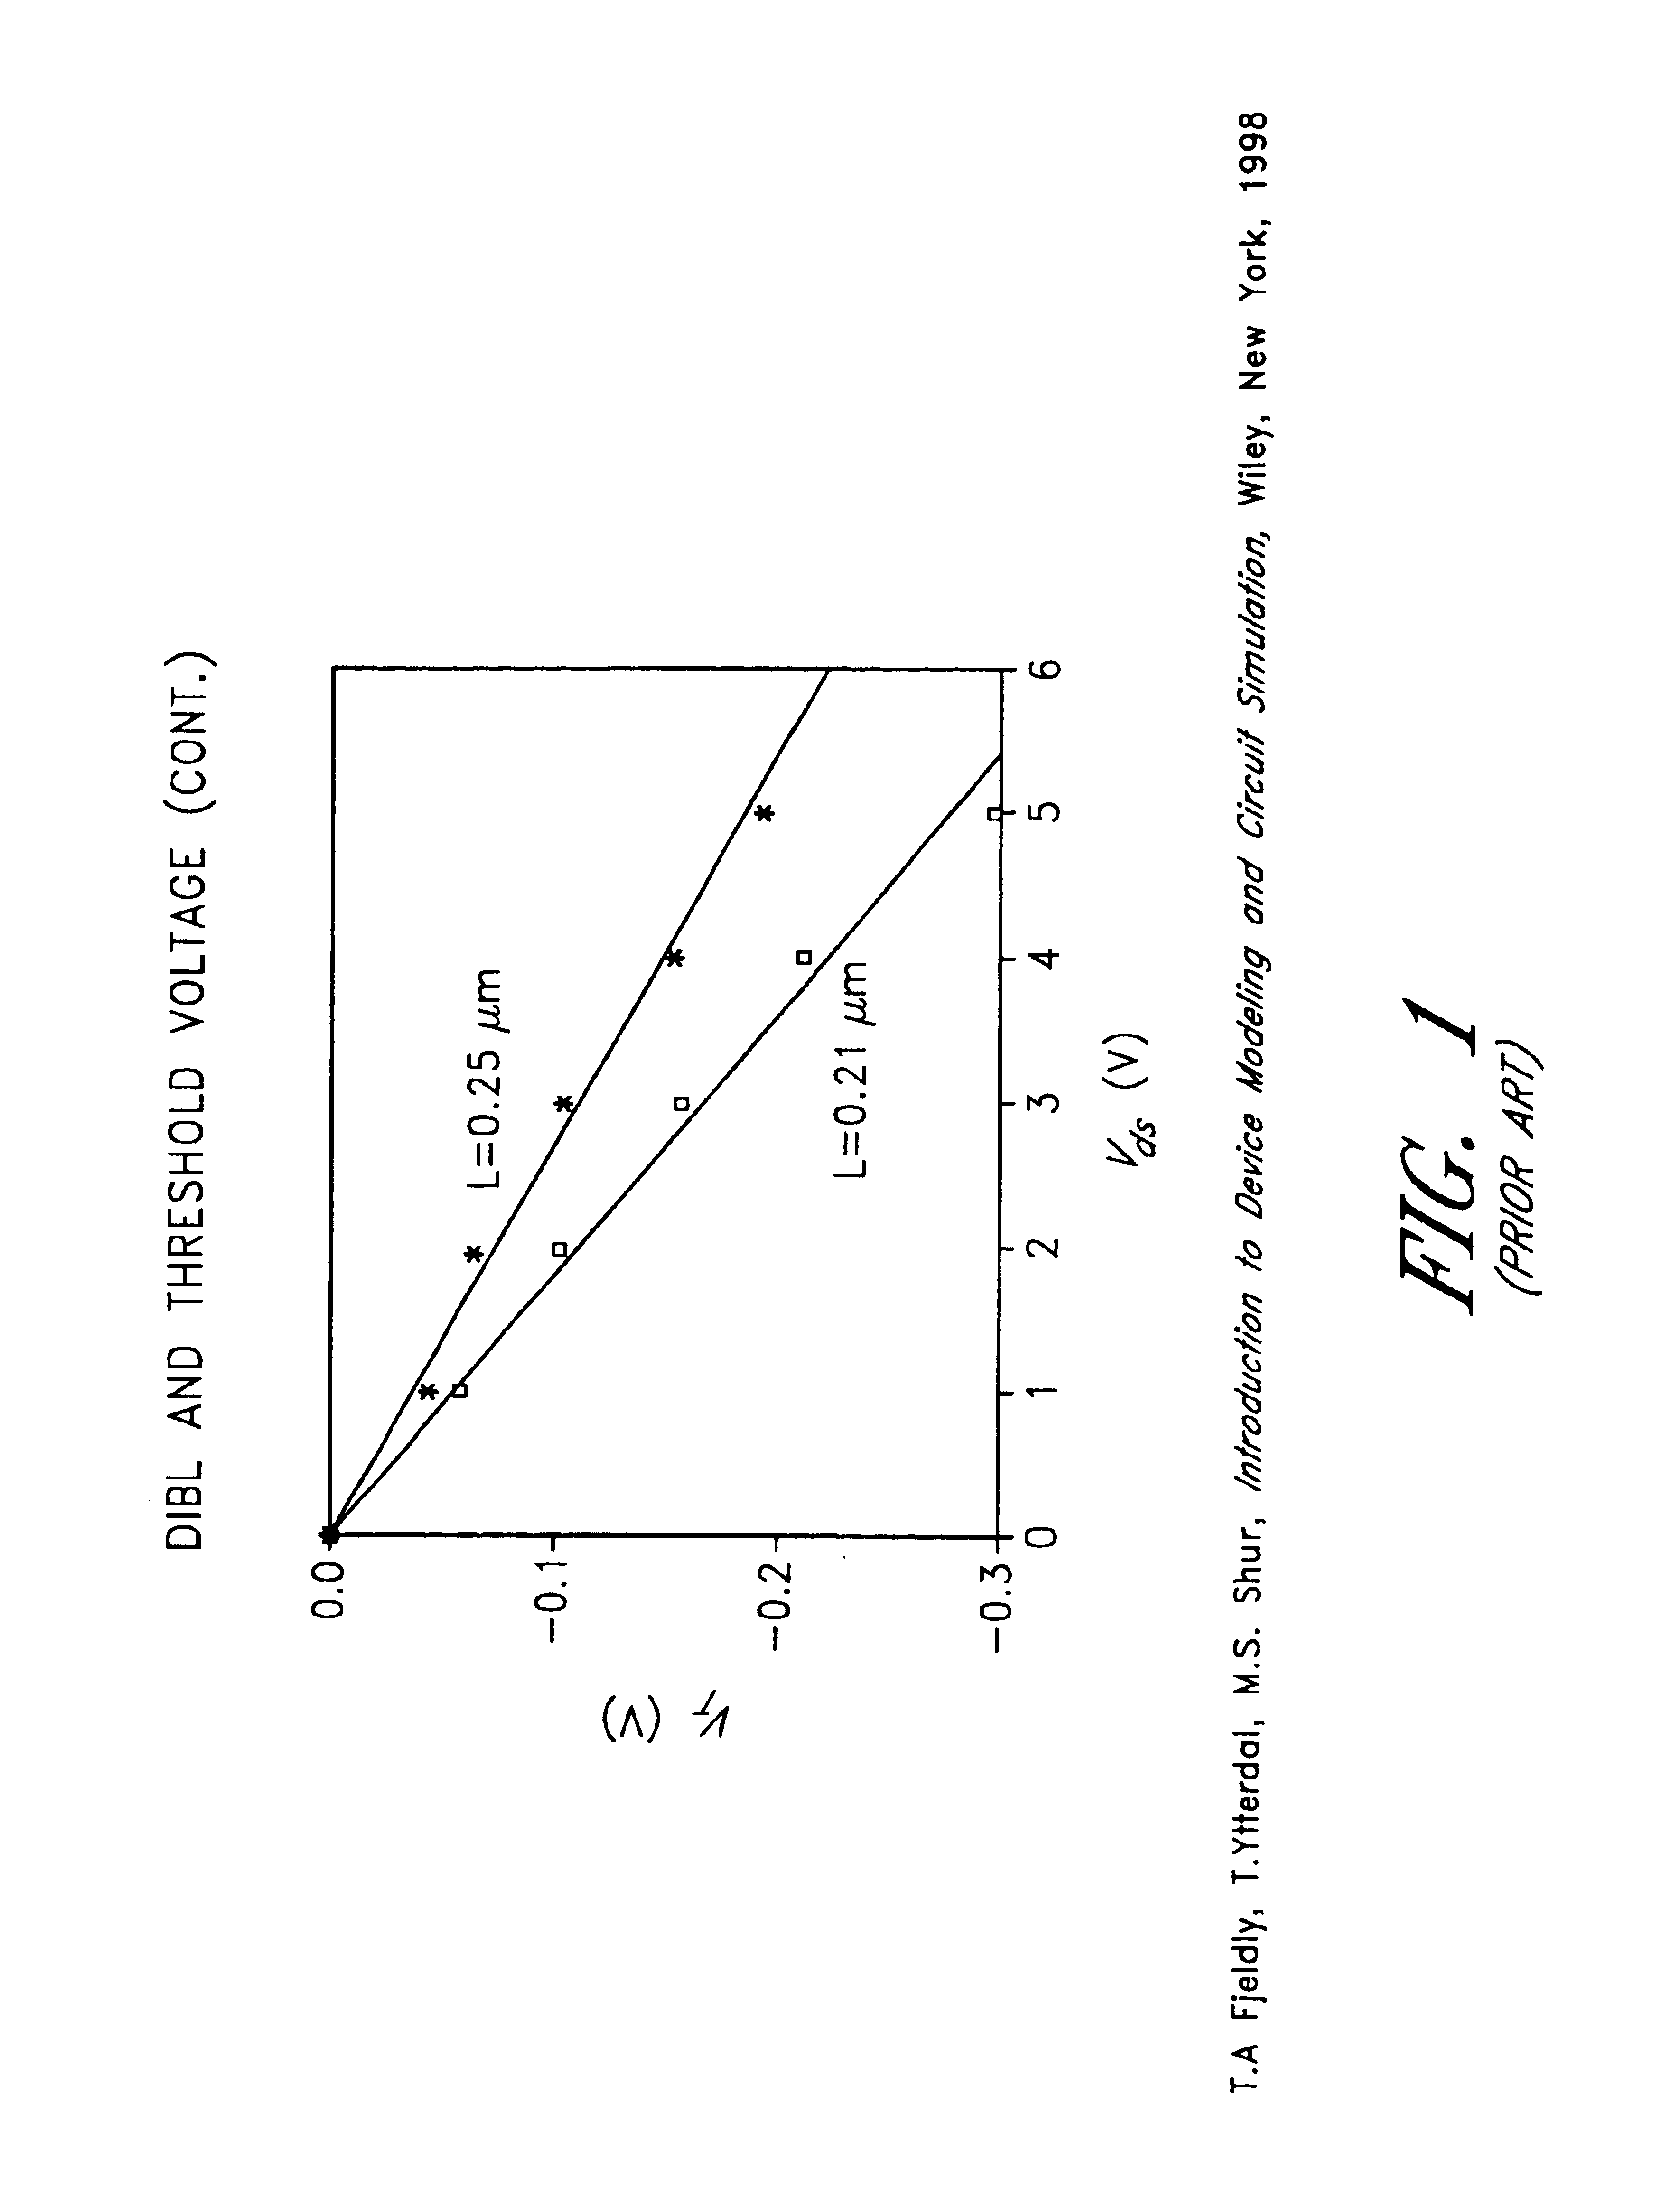 SOI CMOS device with reduced DIBL